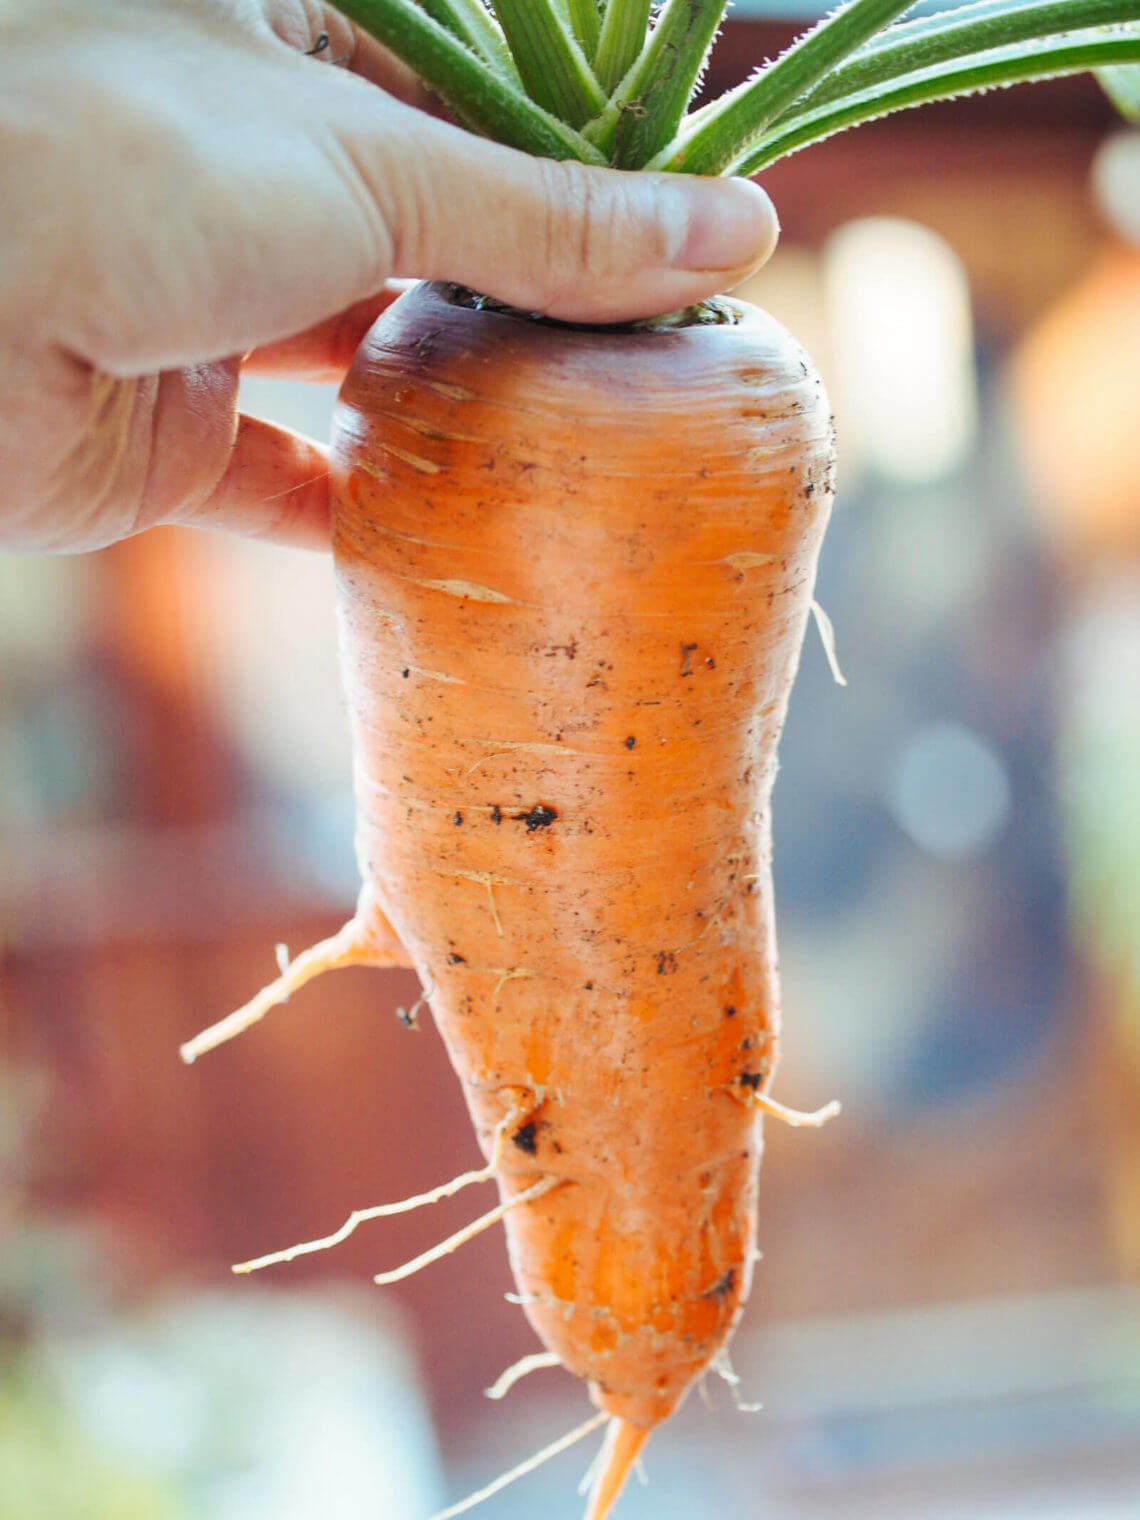 How deep are the roots of garden vegetables?